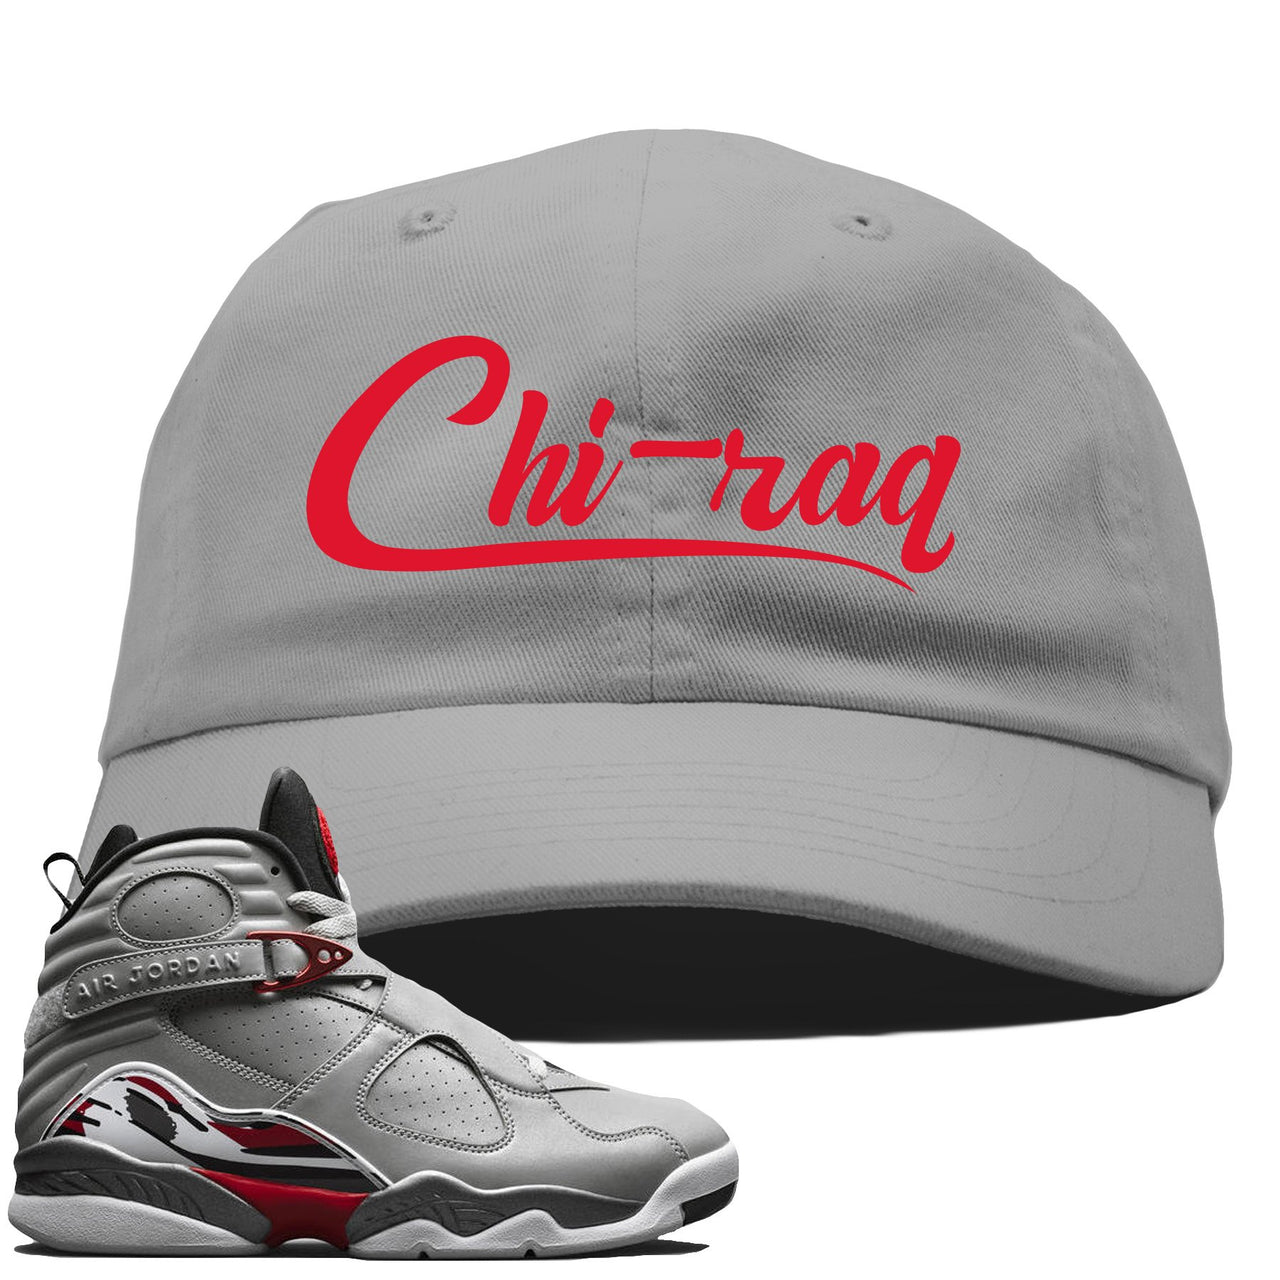 Reflections of a Champion 8s Dad Hat | Chiraq Script, Gray